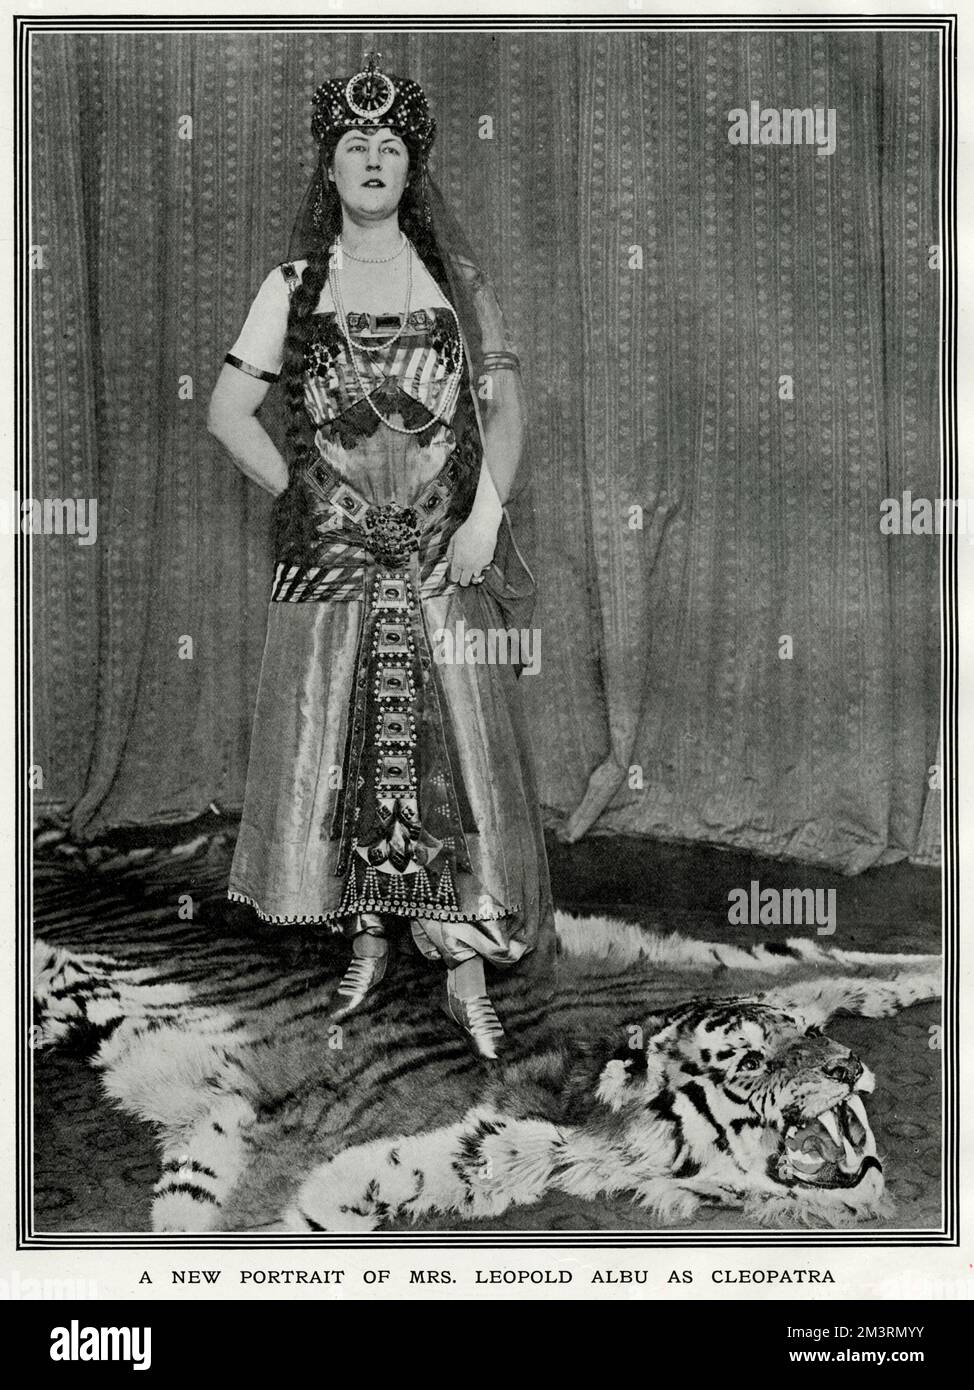 Mrs Leopold Albu, formerly Adelaide Veronica Elizabeth Burton, wife of Leopold Albu, mining magnate.  Pictured in the costume she wore at a small dance she gave at 4 Hamilton Place, Park Lane in February 1912.  The Tatler remarks that she is, 'a great lover of animals' - particularly tigers by the look of the rug she's standing on.  Adelaide's marriage to Leopold ended in an acrimonious divorce in 1915.       Date: 1912 Stock Photo